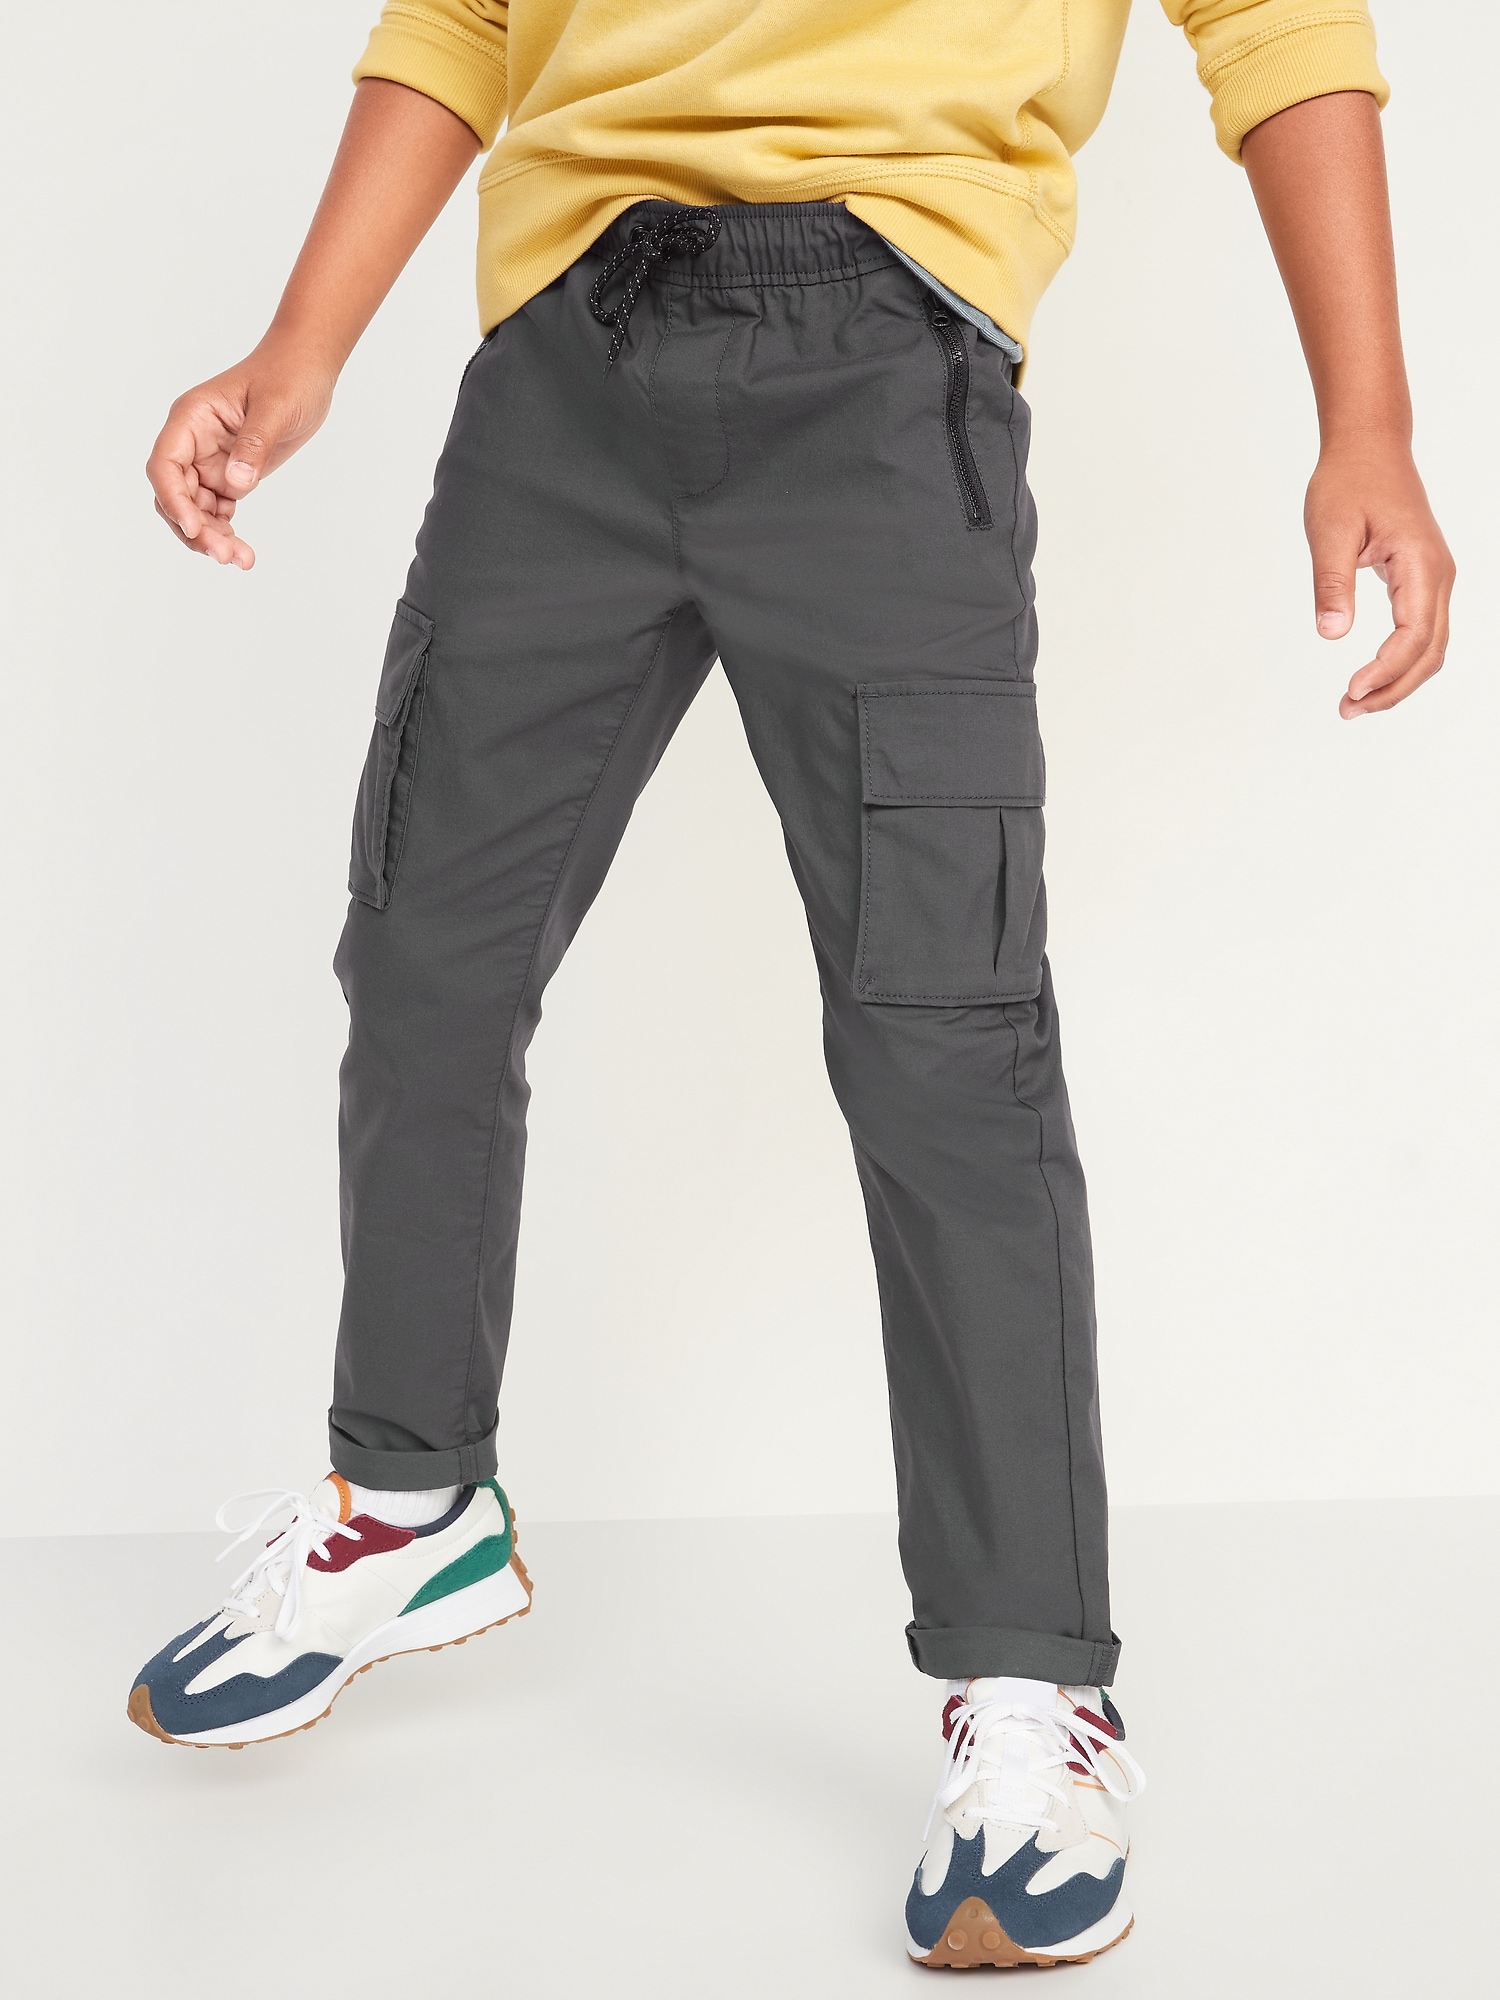 Old navy old navy built in flex twill joggers for boys